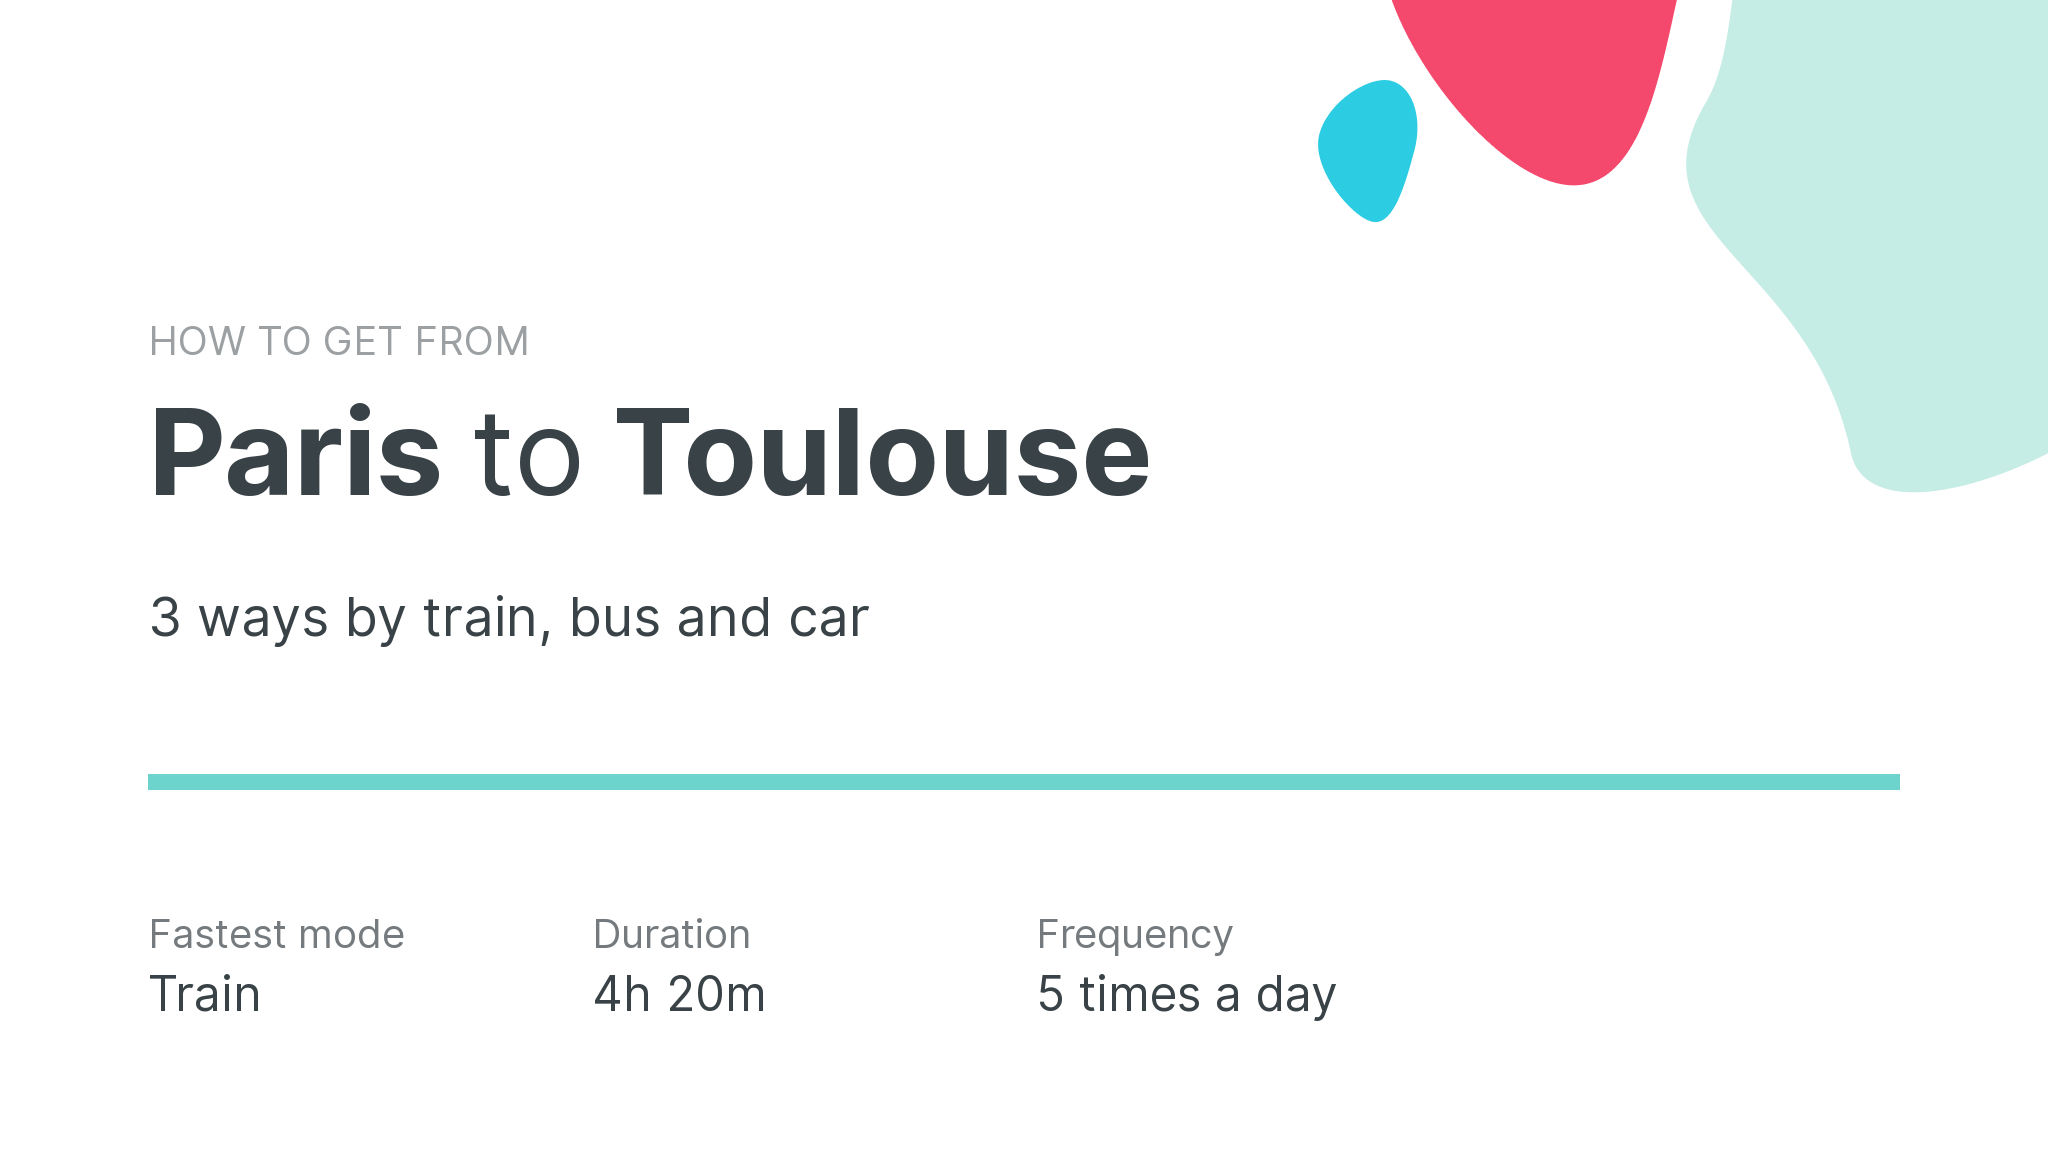 How do I get from Paris to Toulouse